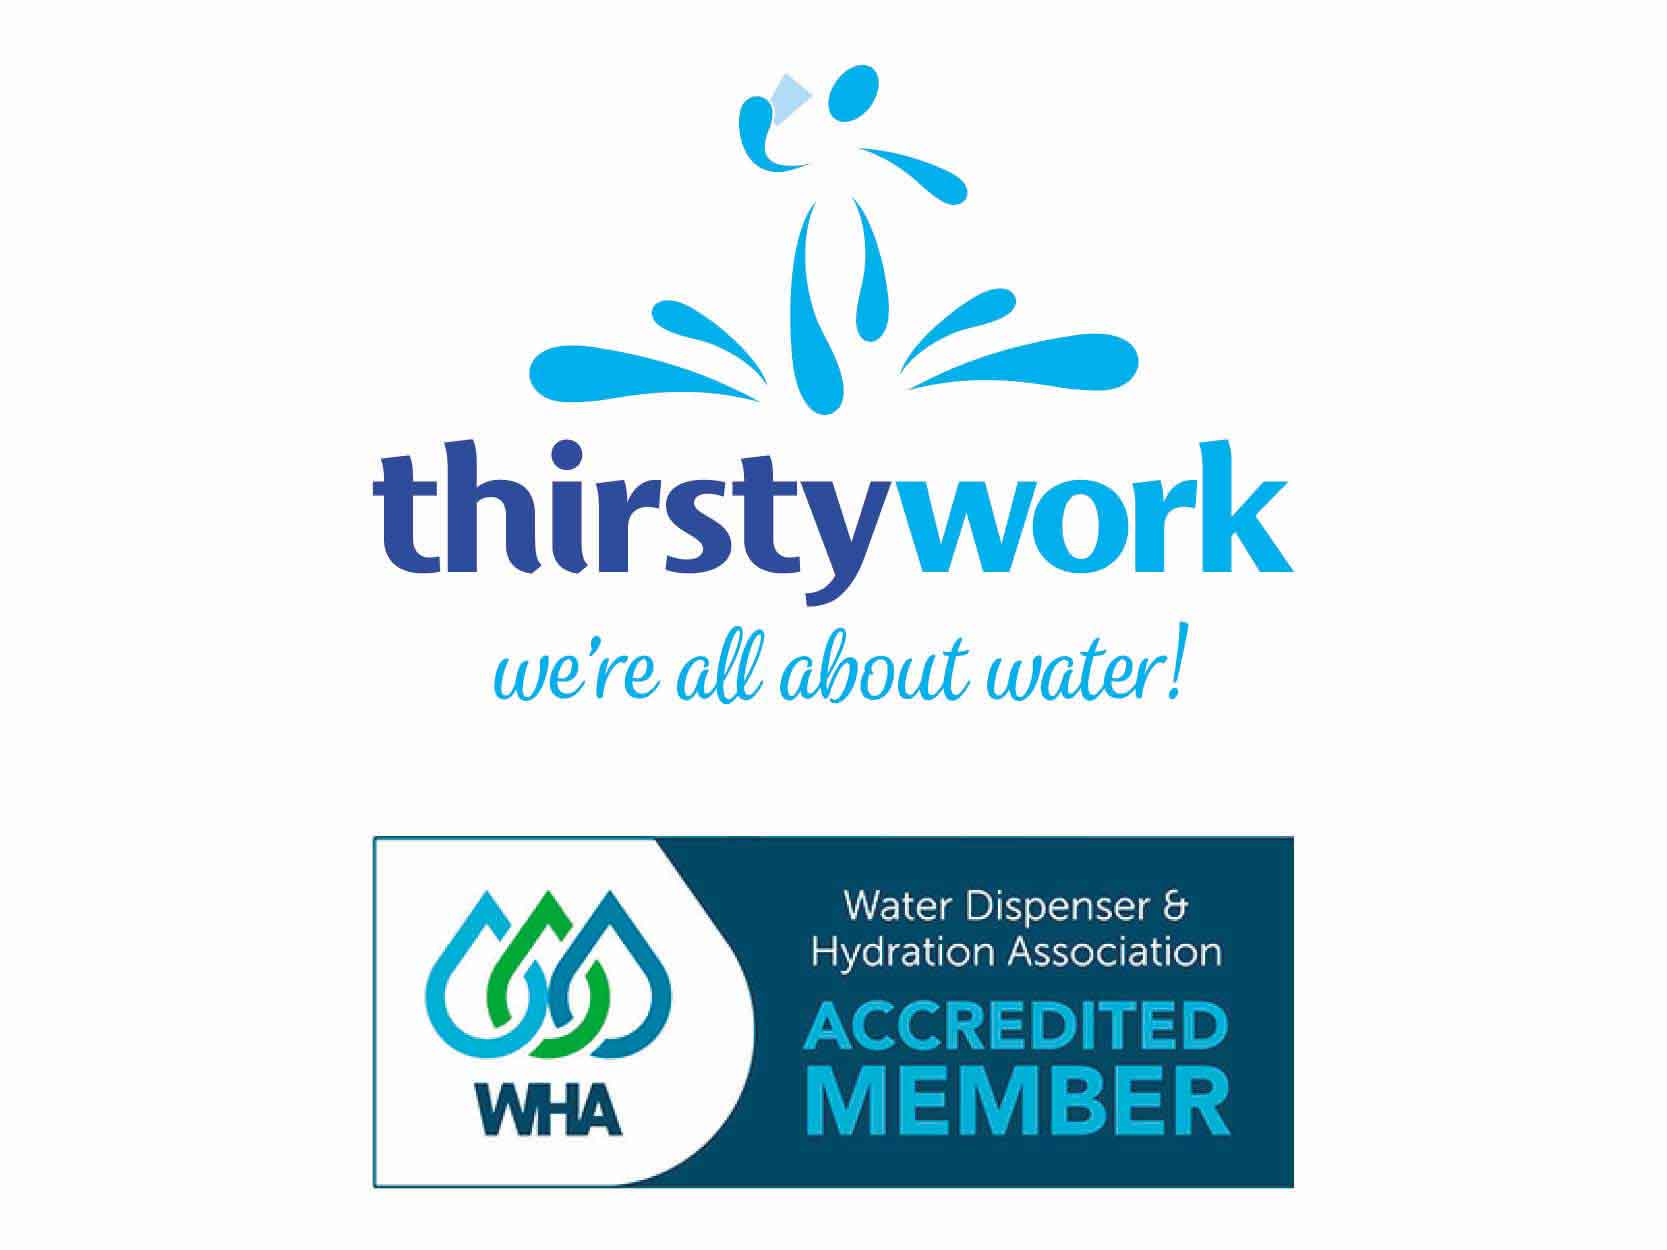 thirsty work logo with WHA